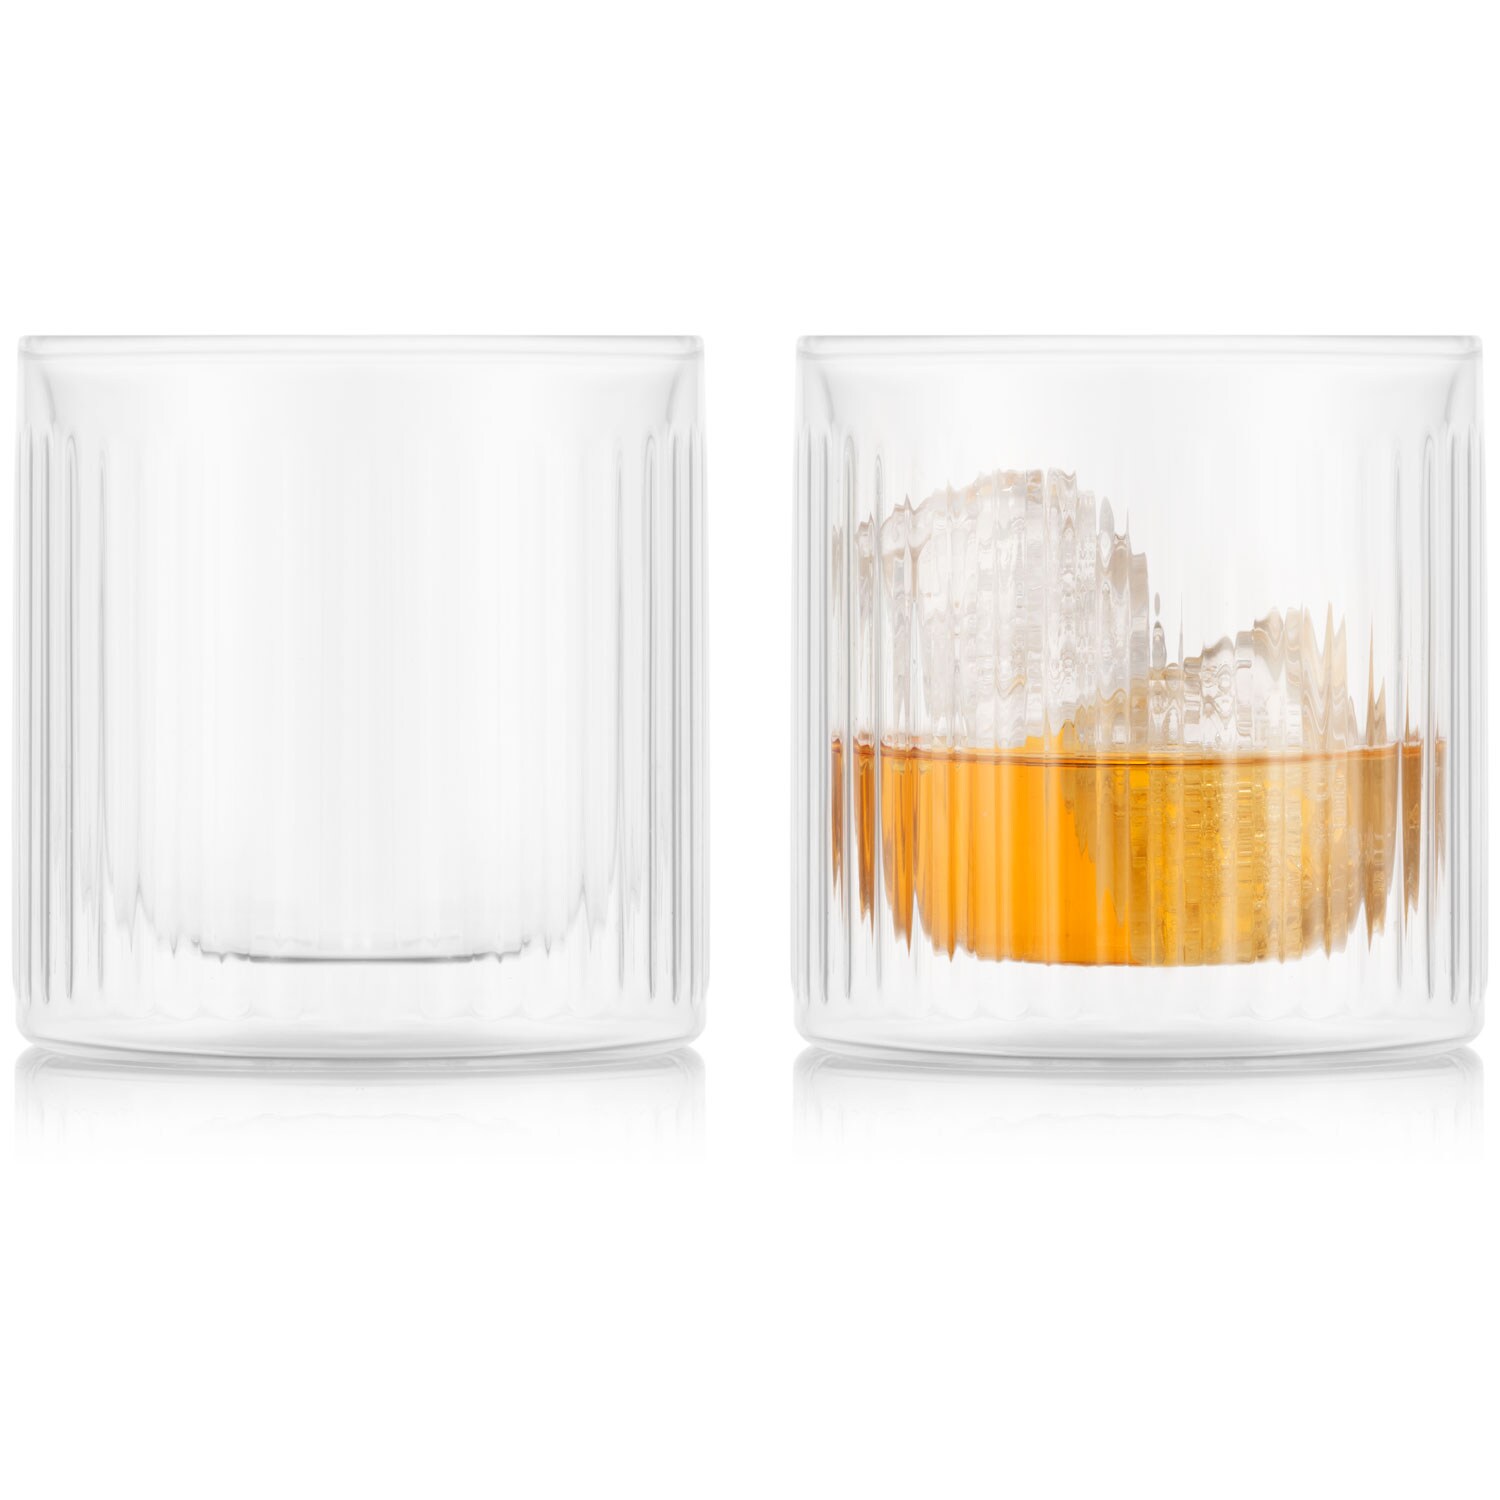 BrüMate NOS'R, double-wall stainless steel whiskey